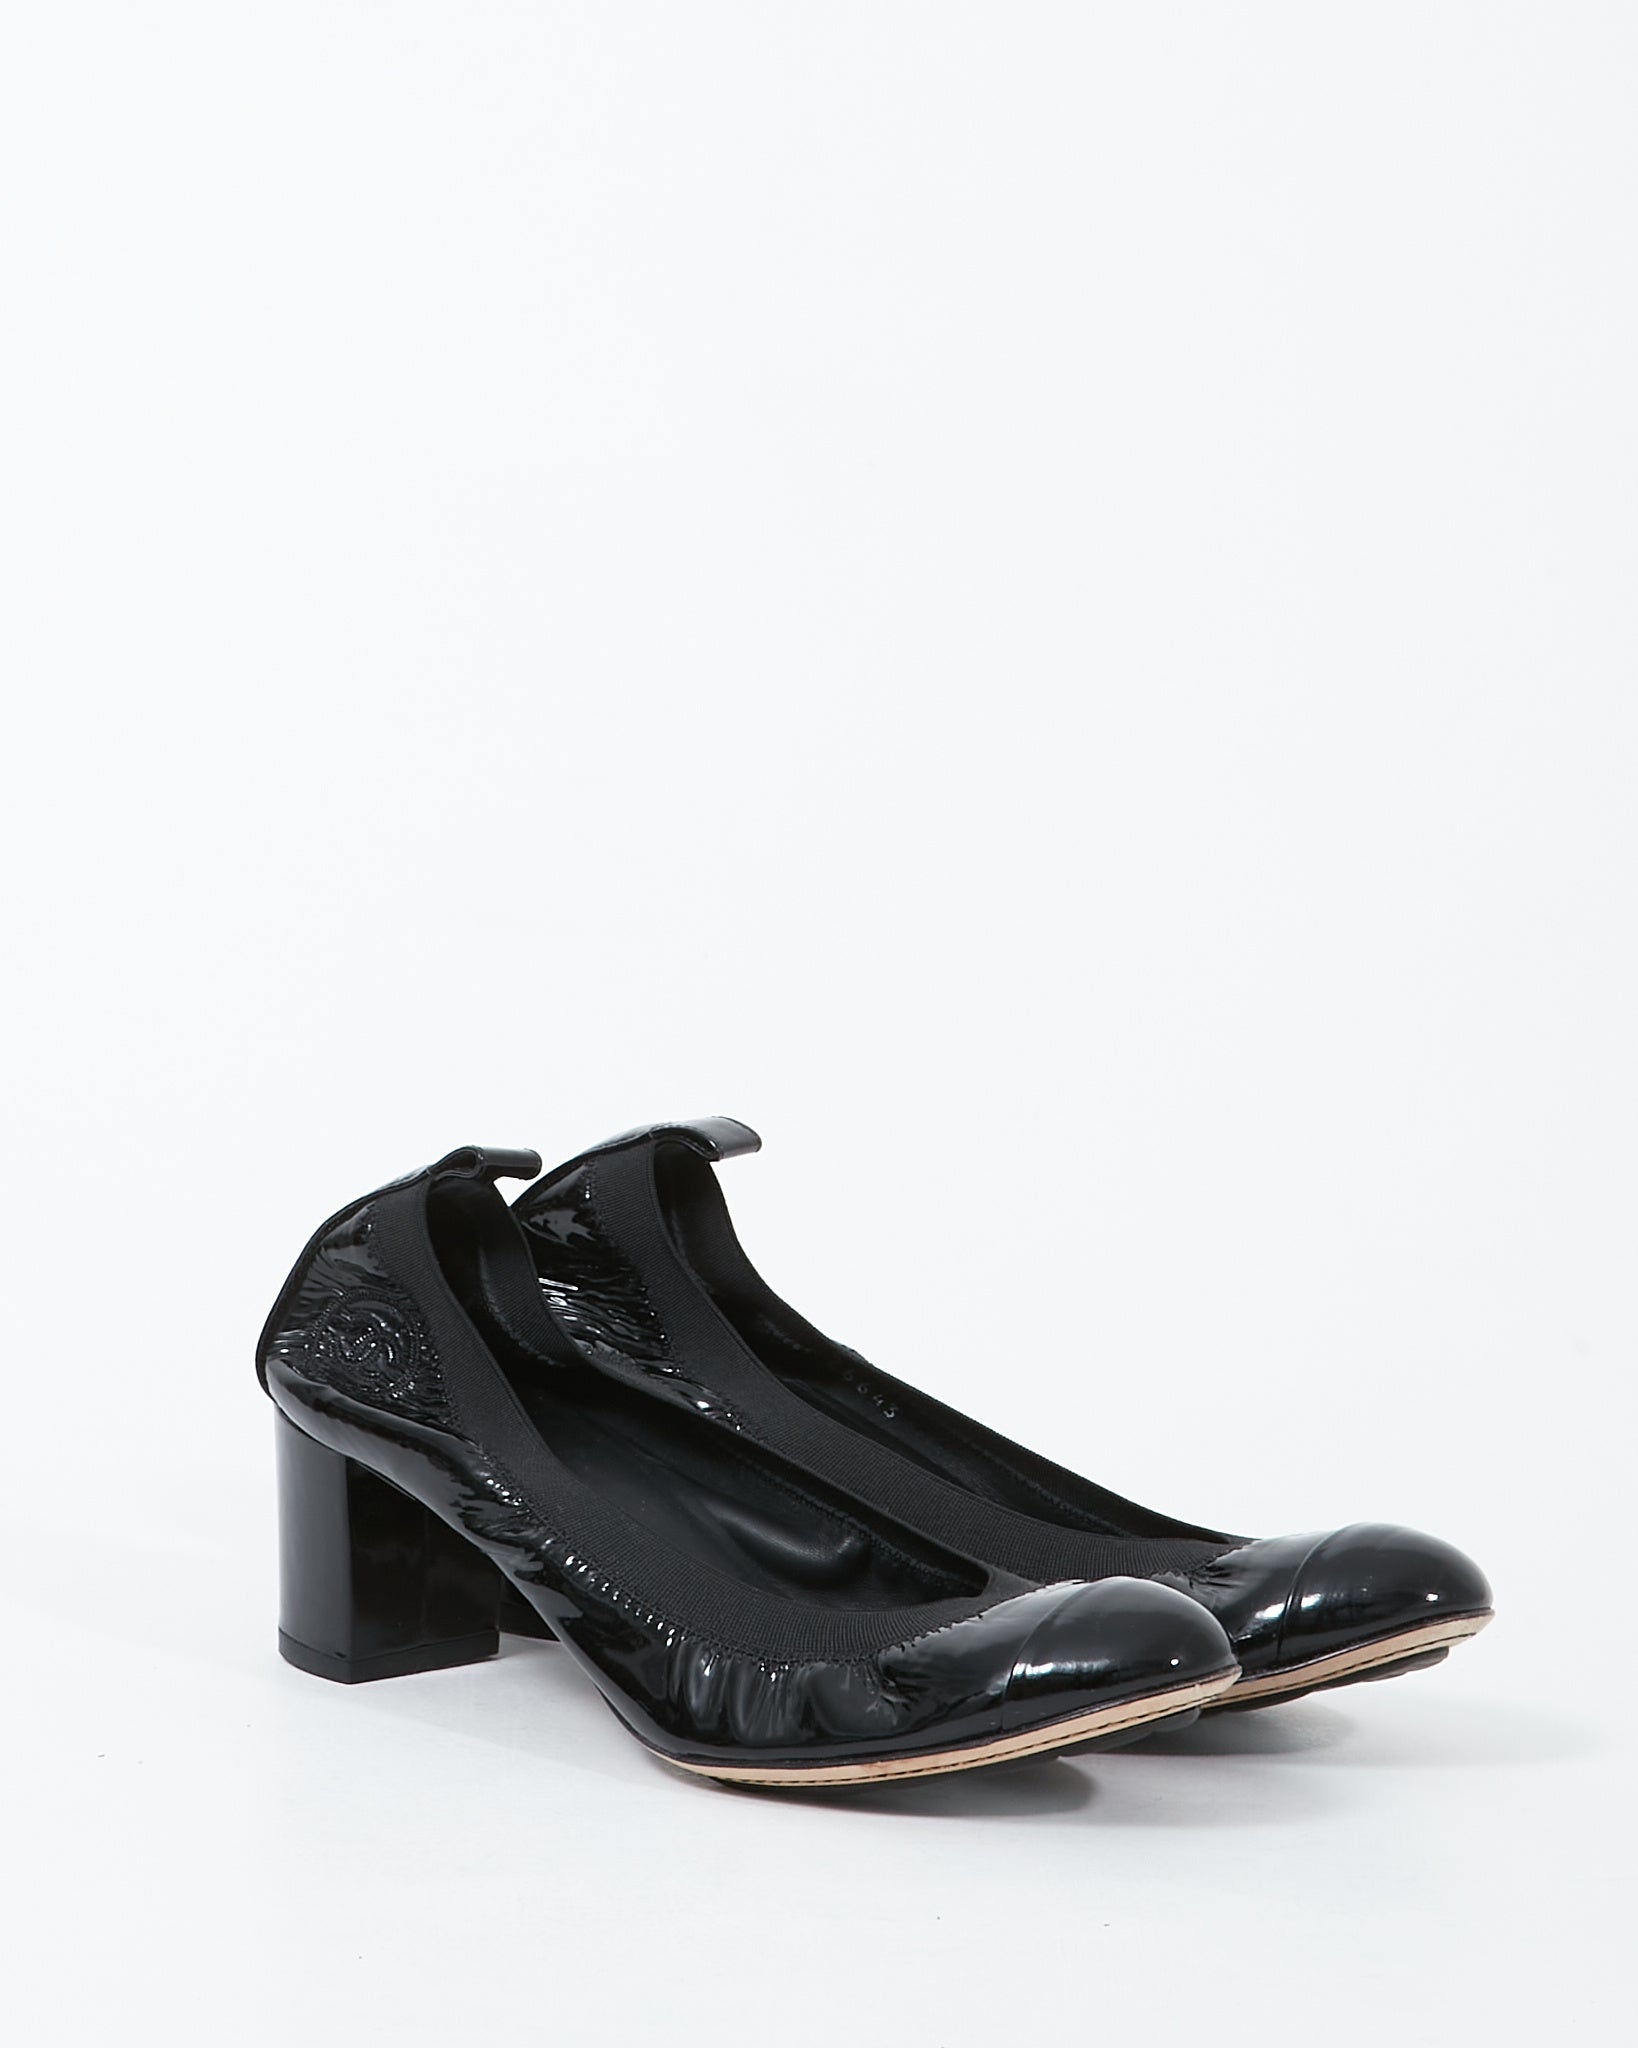 Chanel Black Patent Rounded Tip Pumps - 38.5